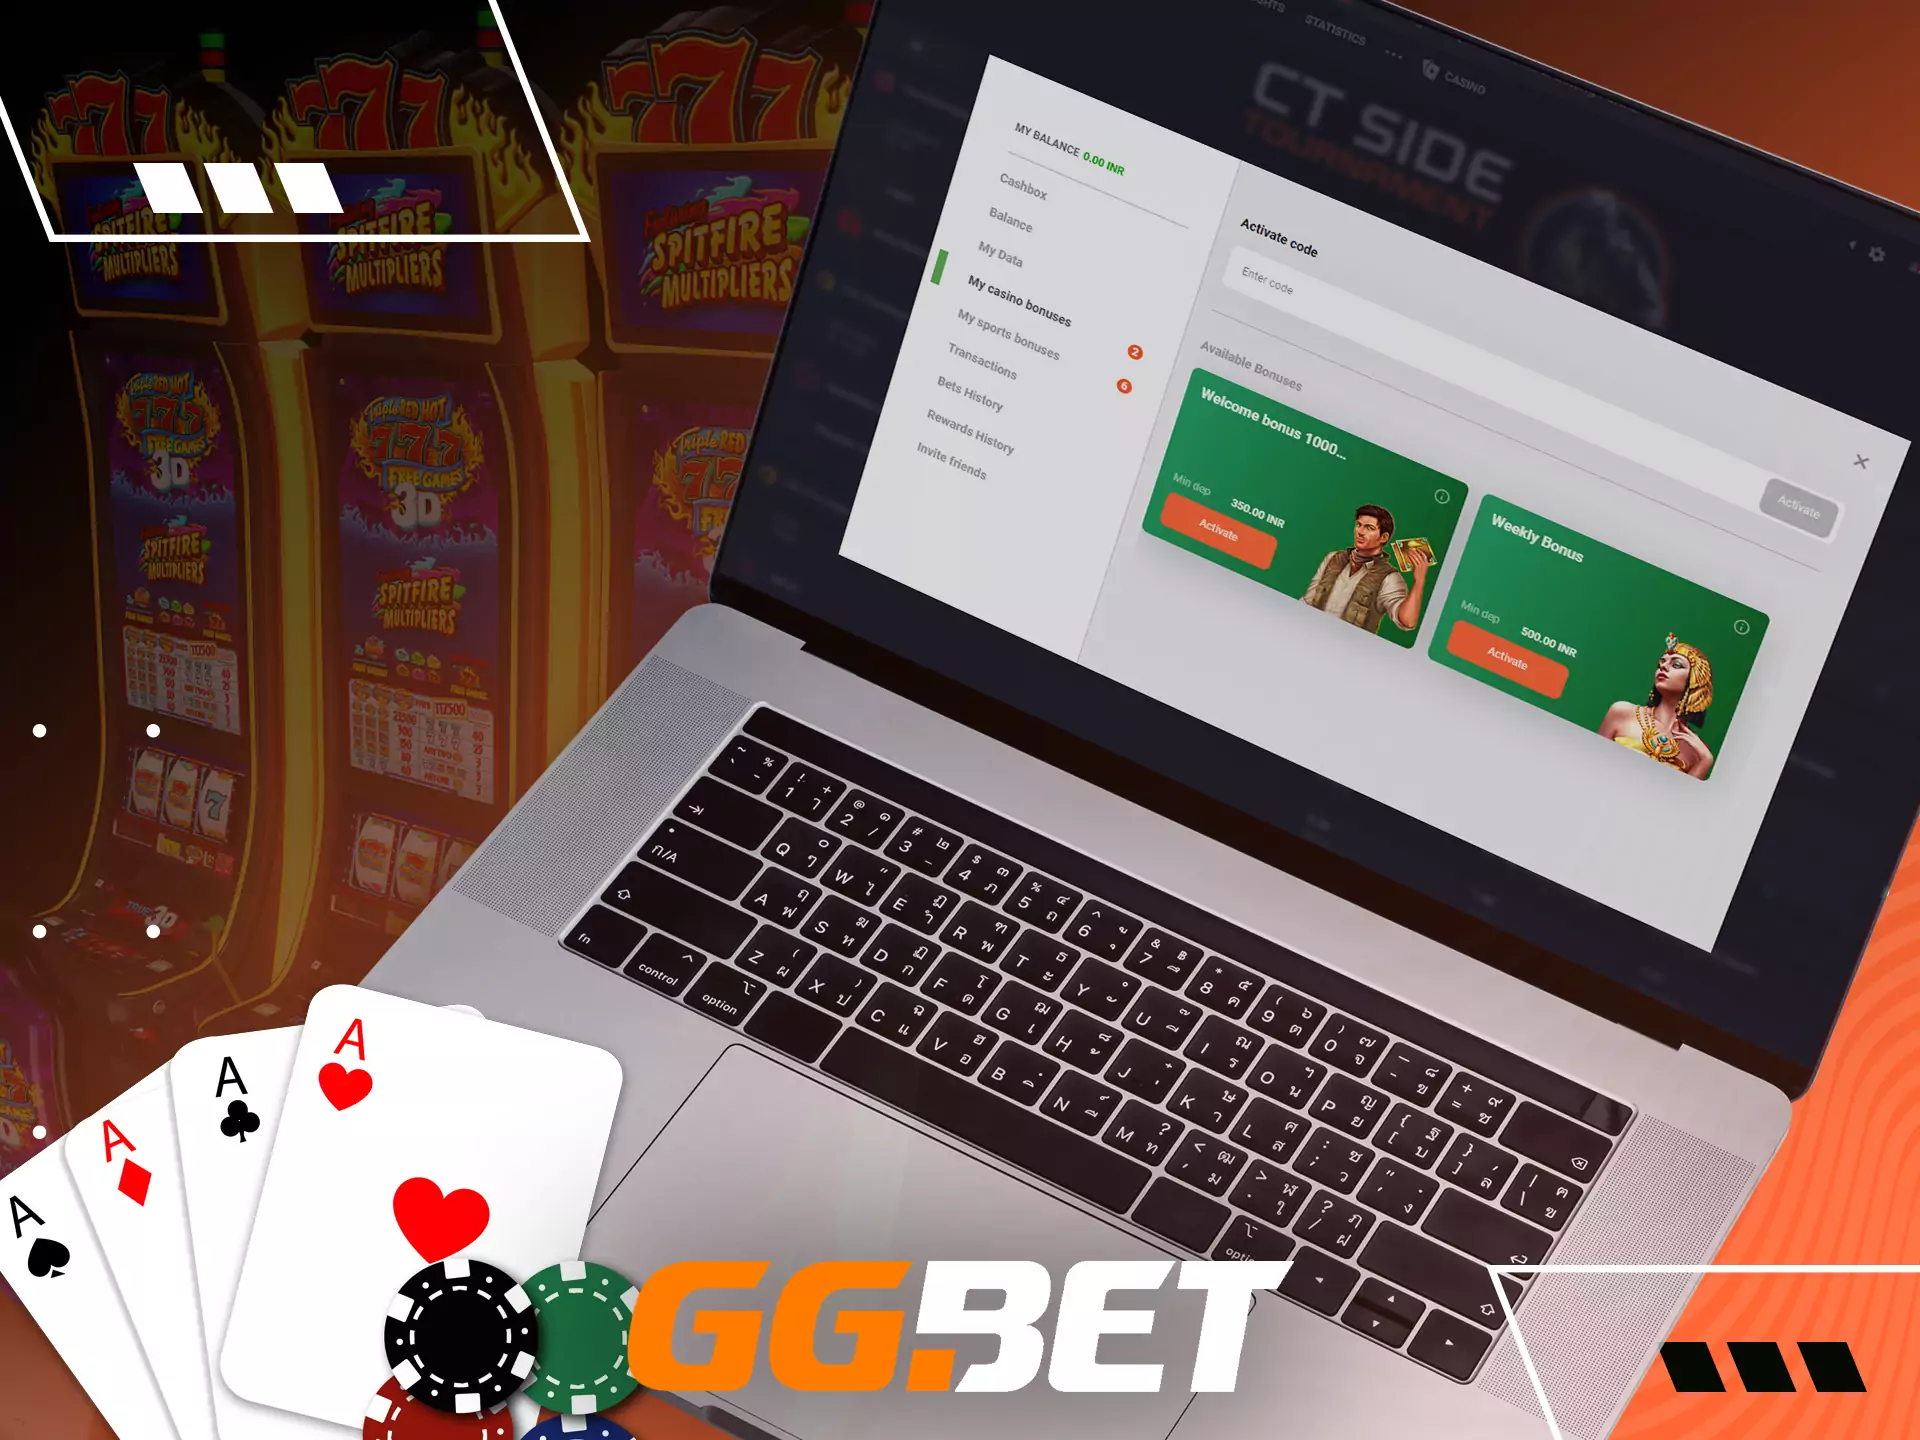 Open your personal profile settings on GGBet and find out about available promotions for casino players.